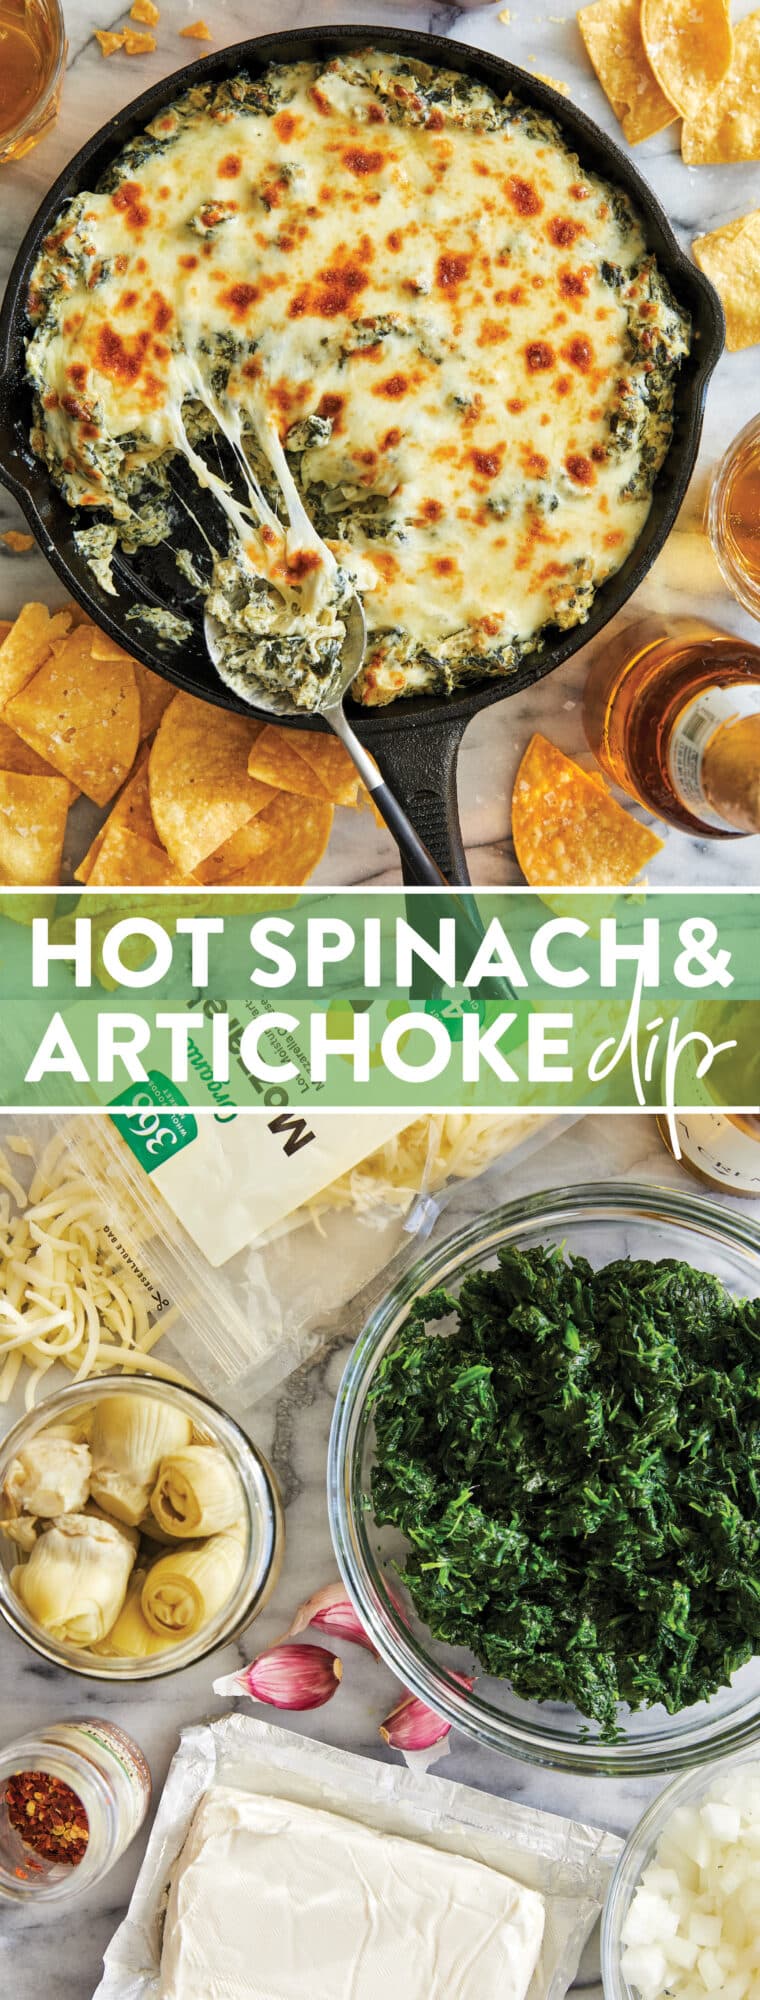 Hot Spinach and Artichoke Dip - The BEST spinach and artichoke dip! So cheesy, so rich, so creamy, so stinking easy. Sure to please everyone!